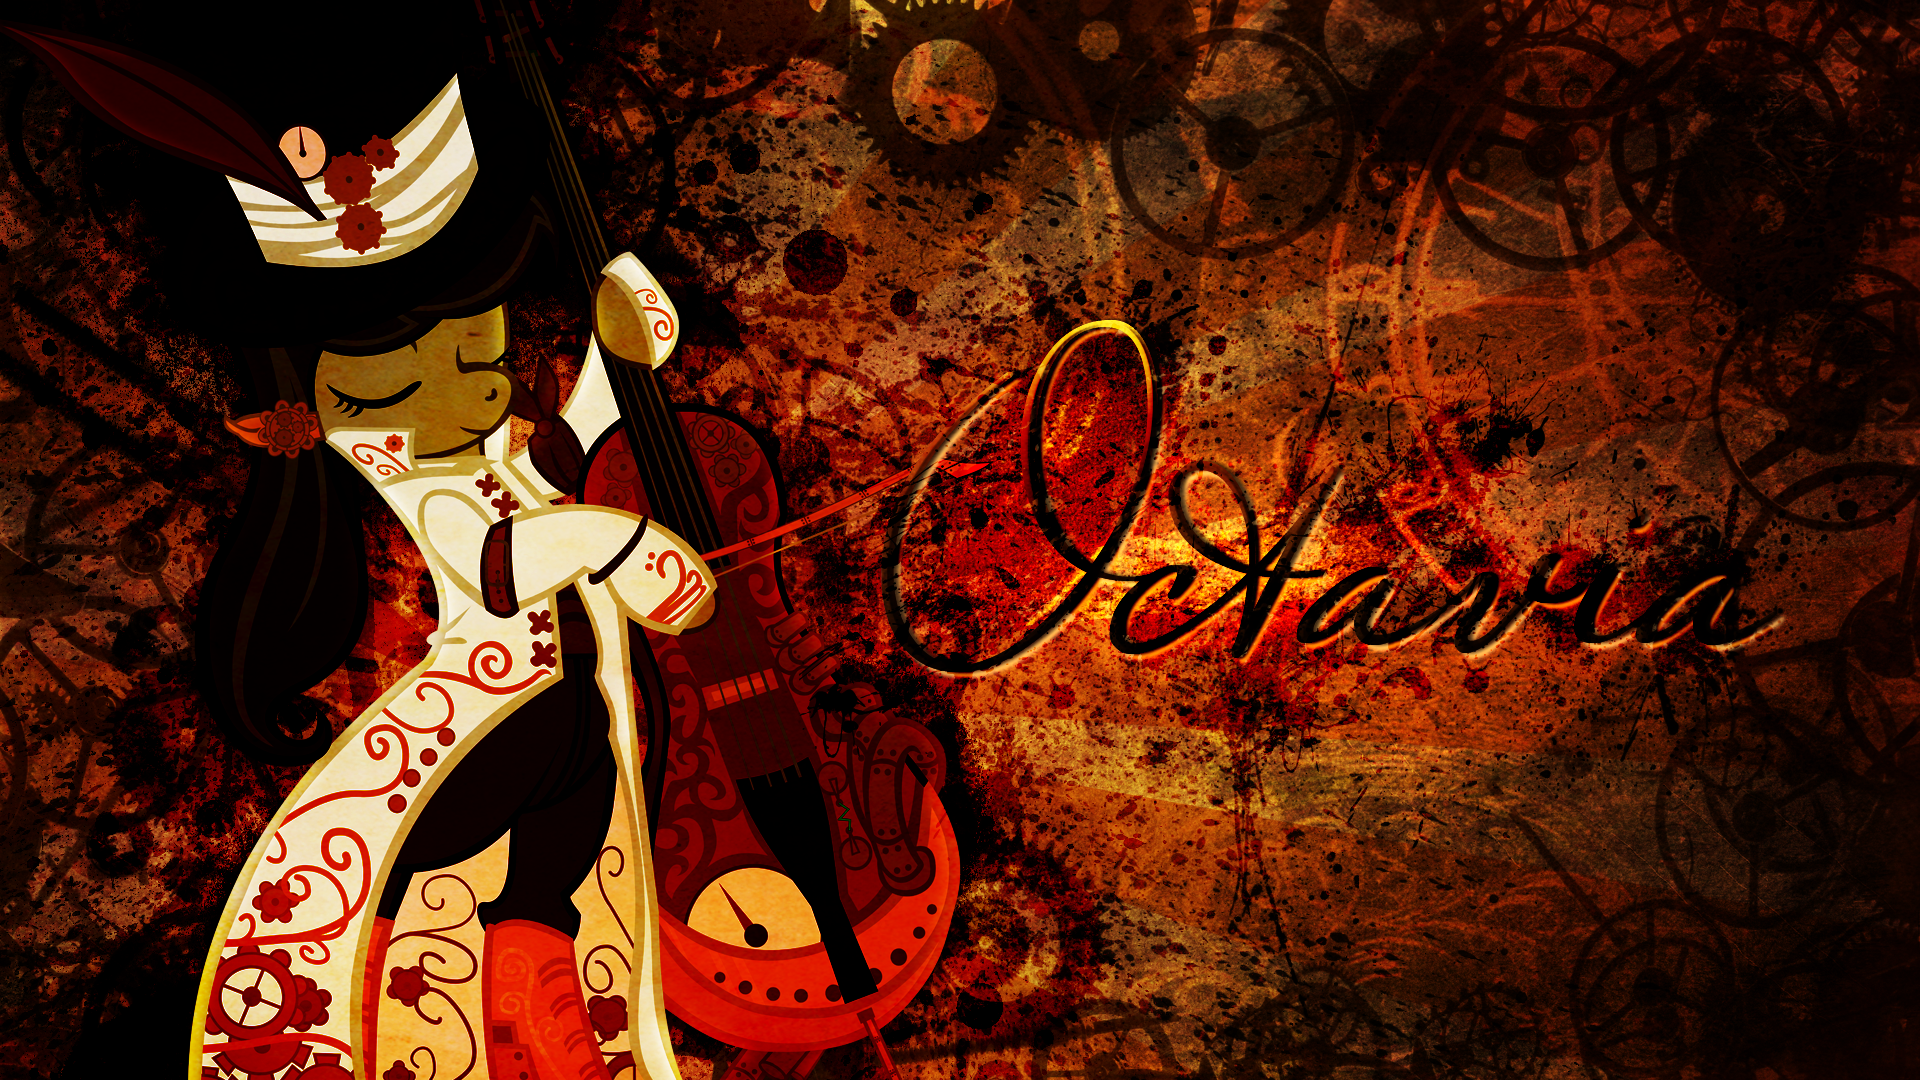 Steampunk Octavia Wallpaper by ObtuseLolcat and Tzolkine